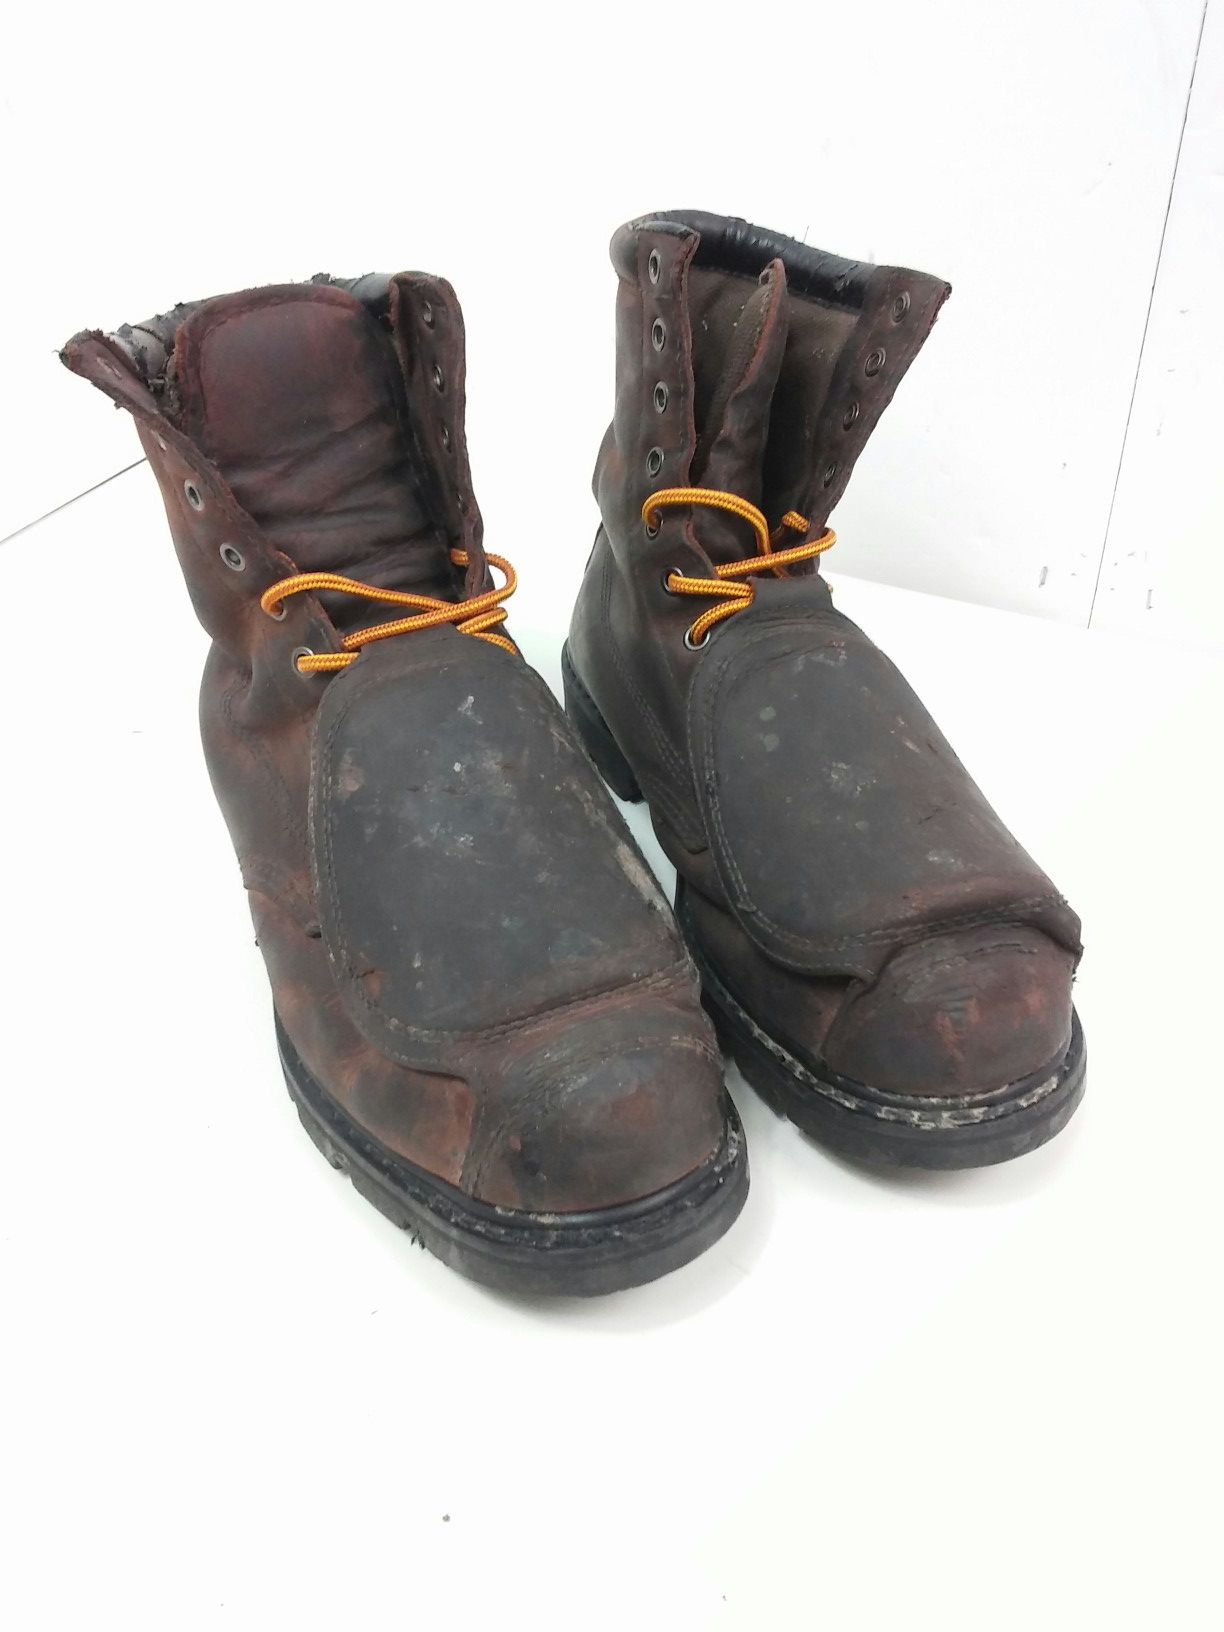 Red Wing Worx Steel Toe Work Boots Size 10 M 5489 Metatarsal Guard